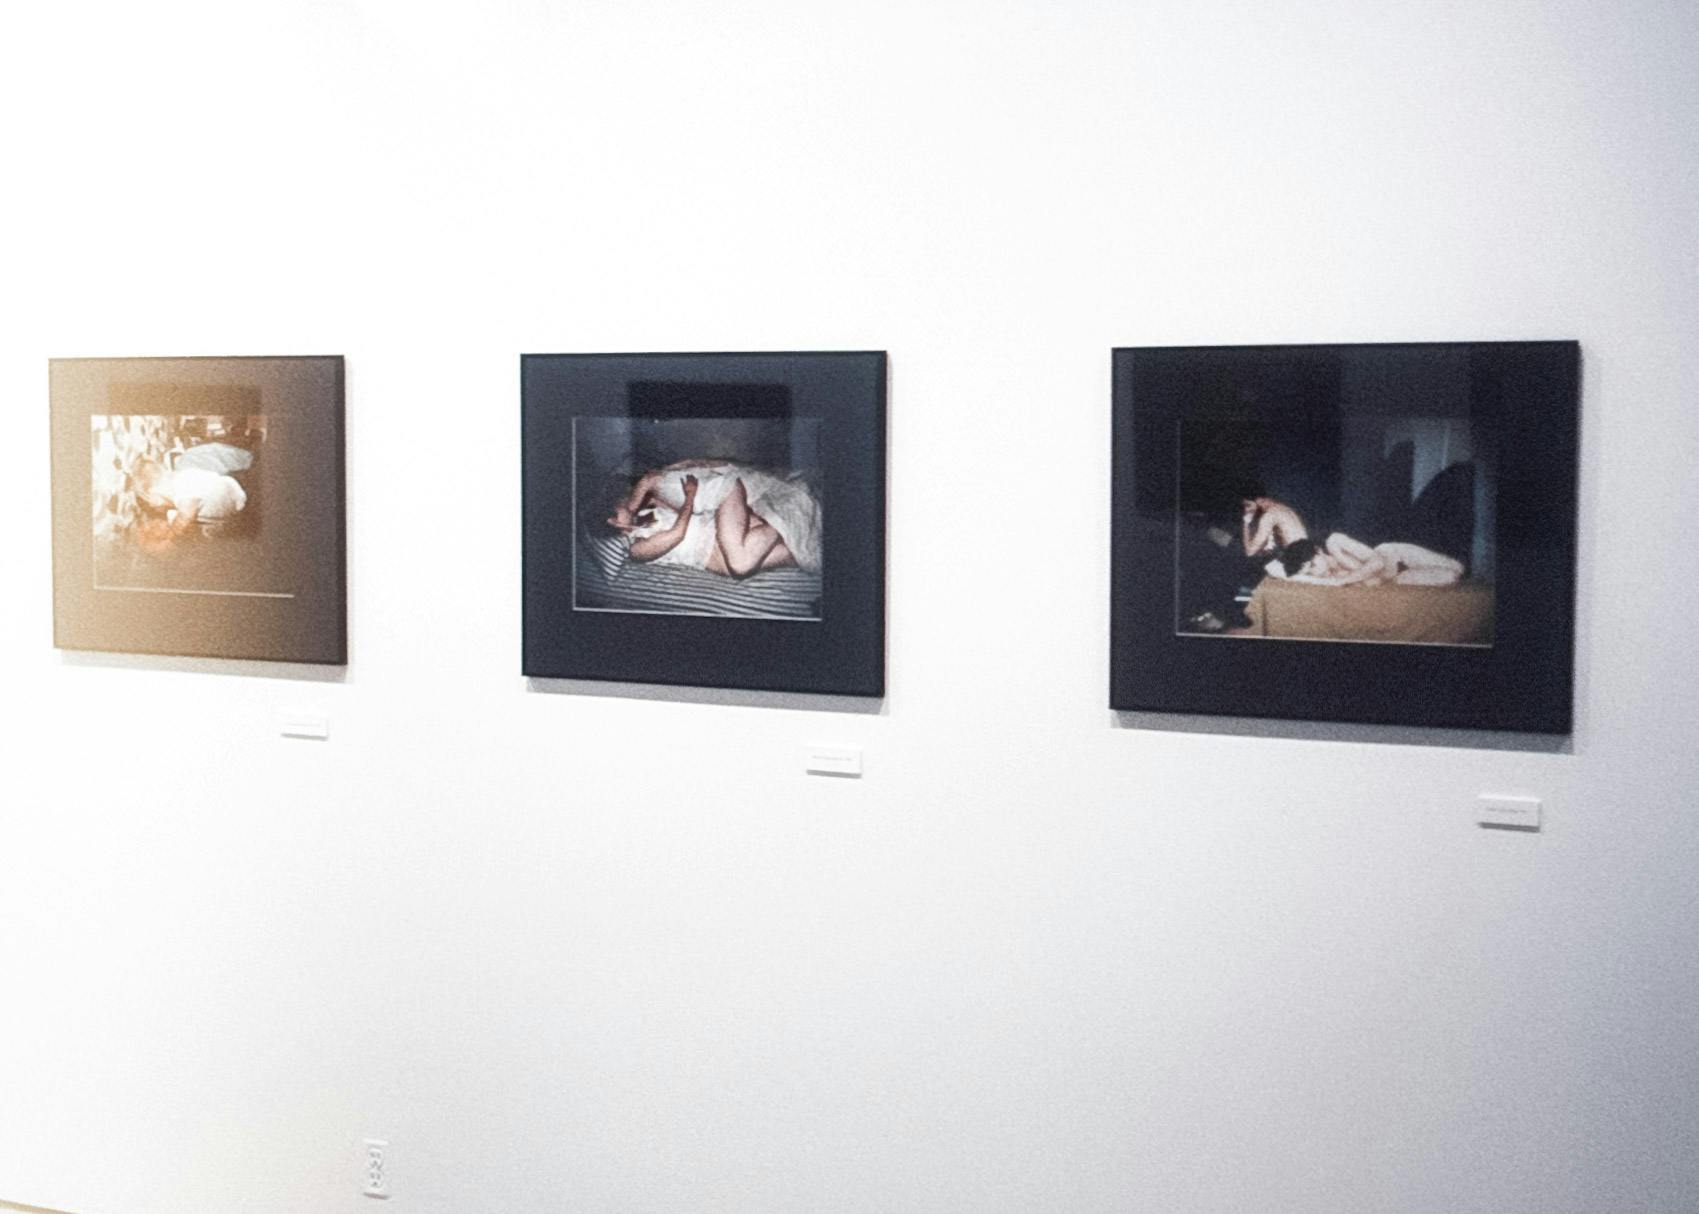 Three framed photo works on a white wall. All photos are of different couples. From left to right, the couples go from dressed to nude they appear to be dancing, having sex, and resting together.